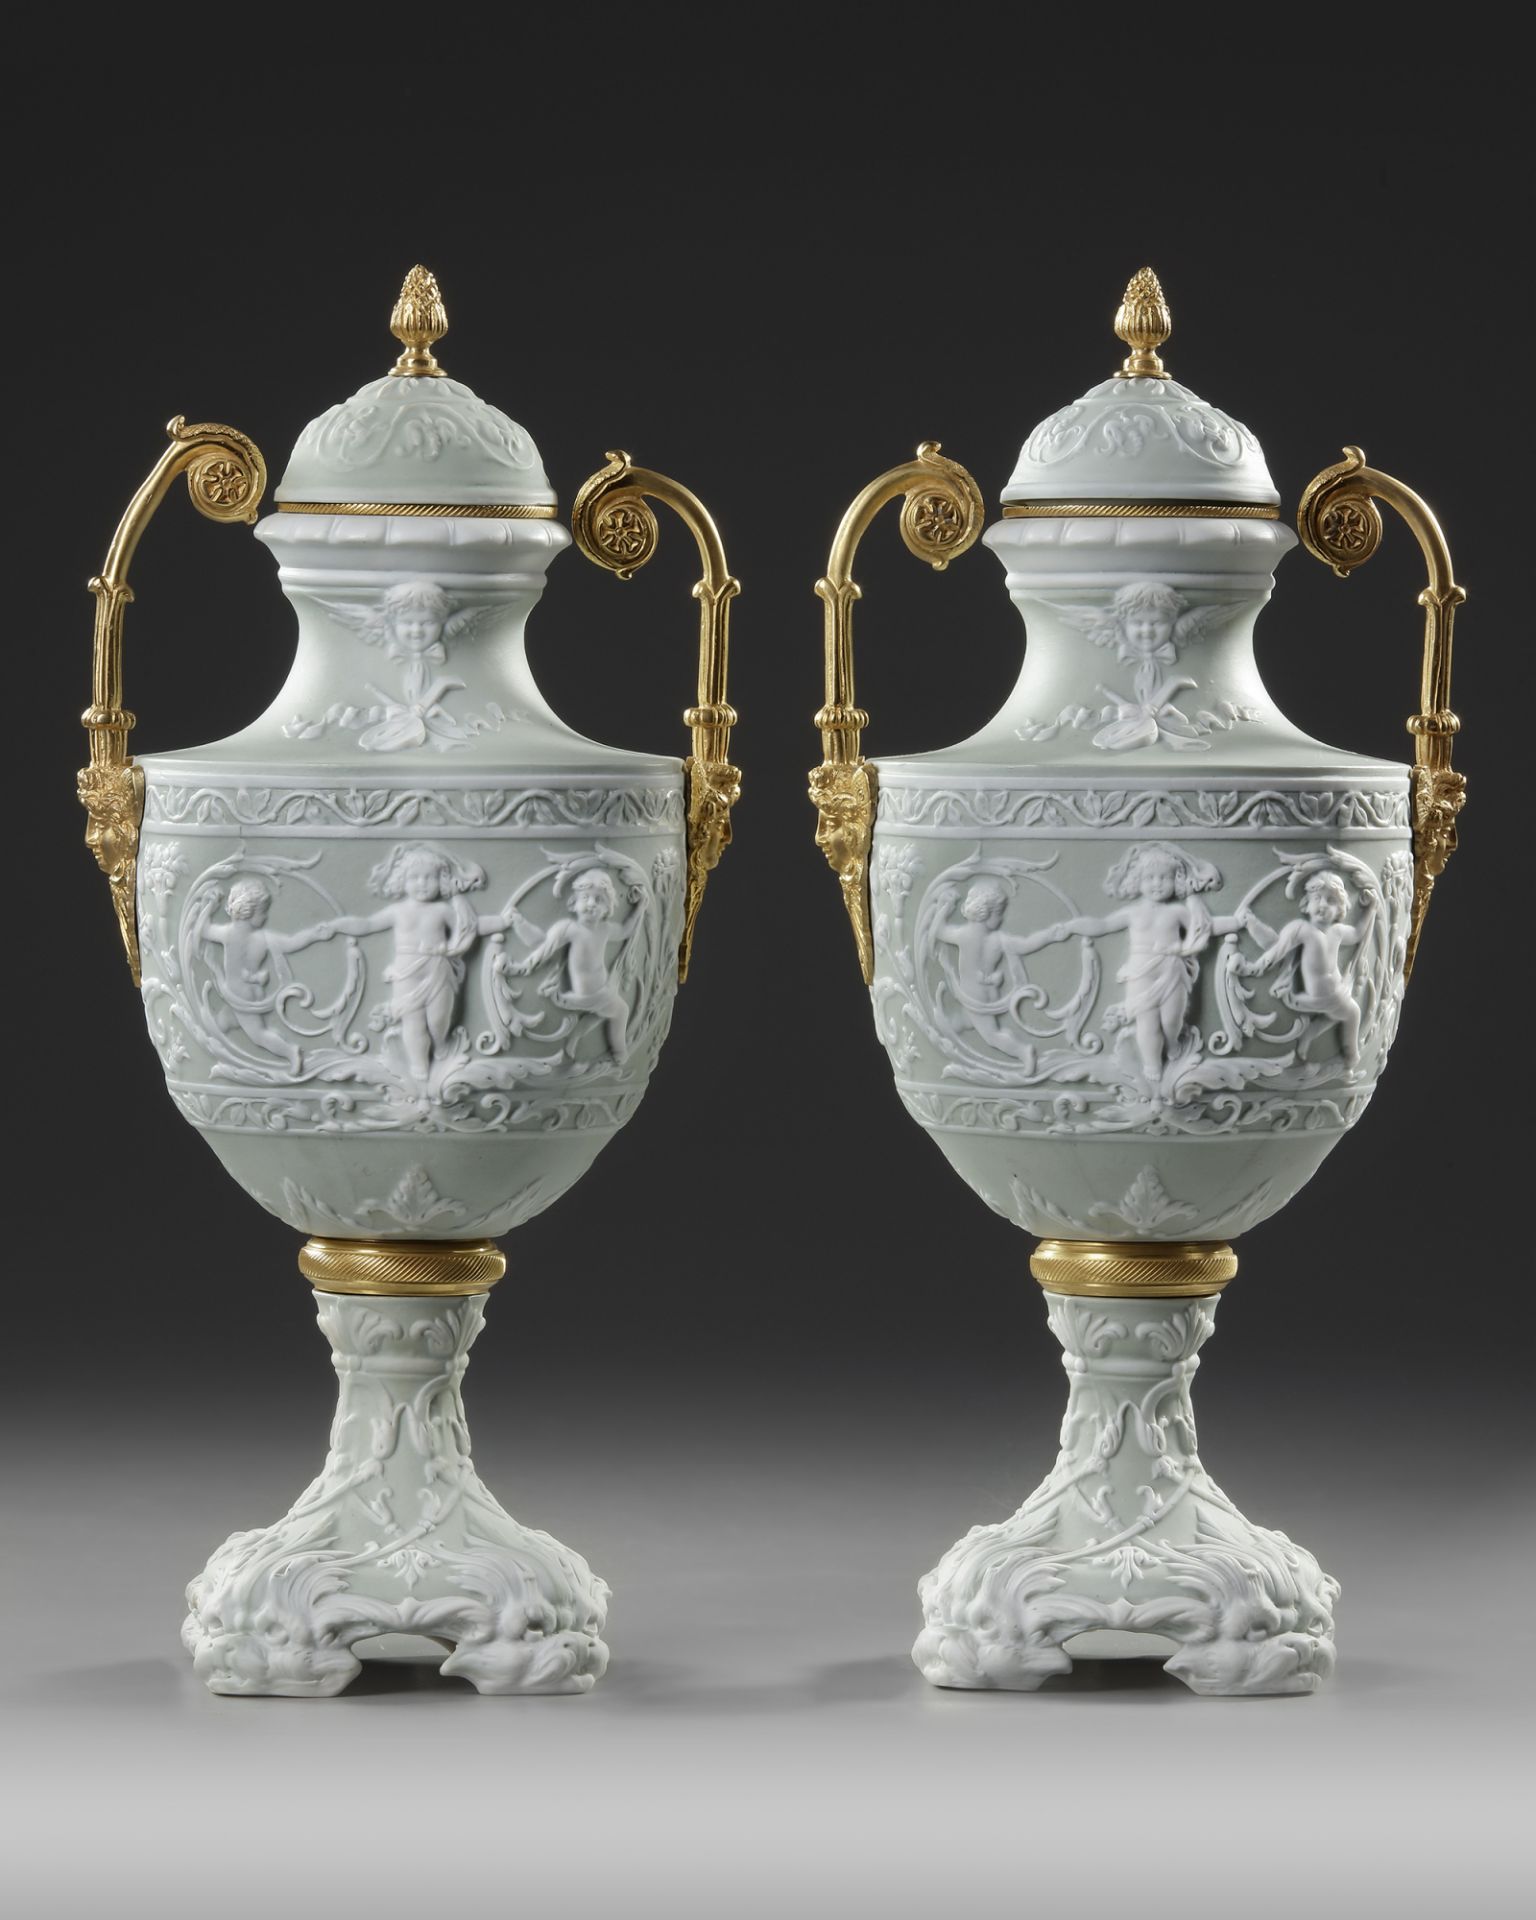 A PAIR OF WEDGWOOD VASES, ENGLAND, 19TH CENTURY - Image 2 of 3